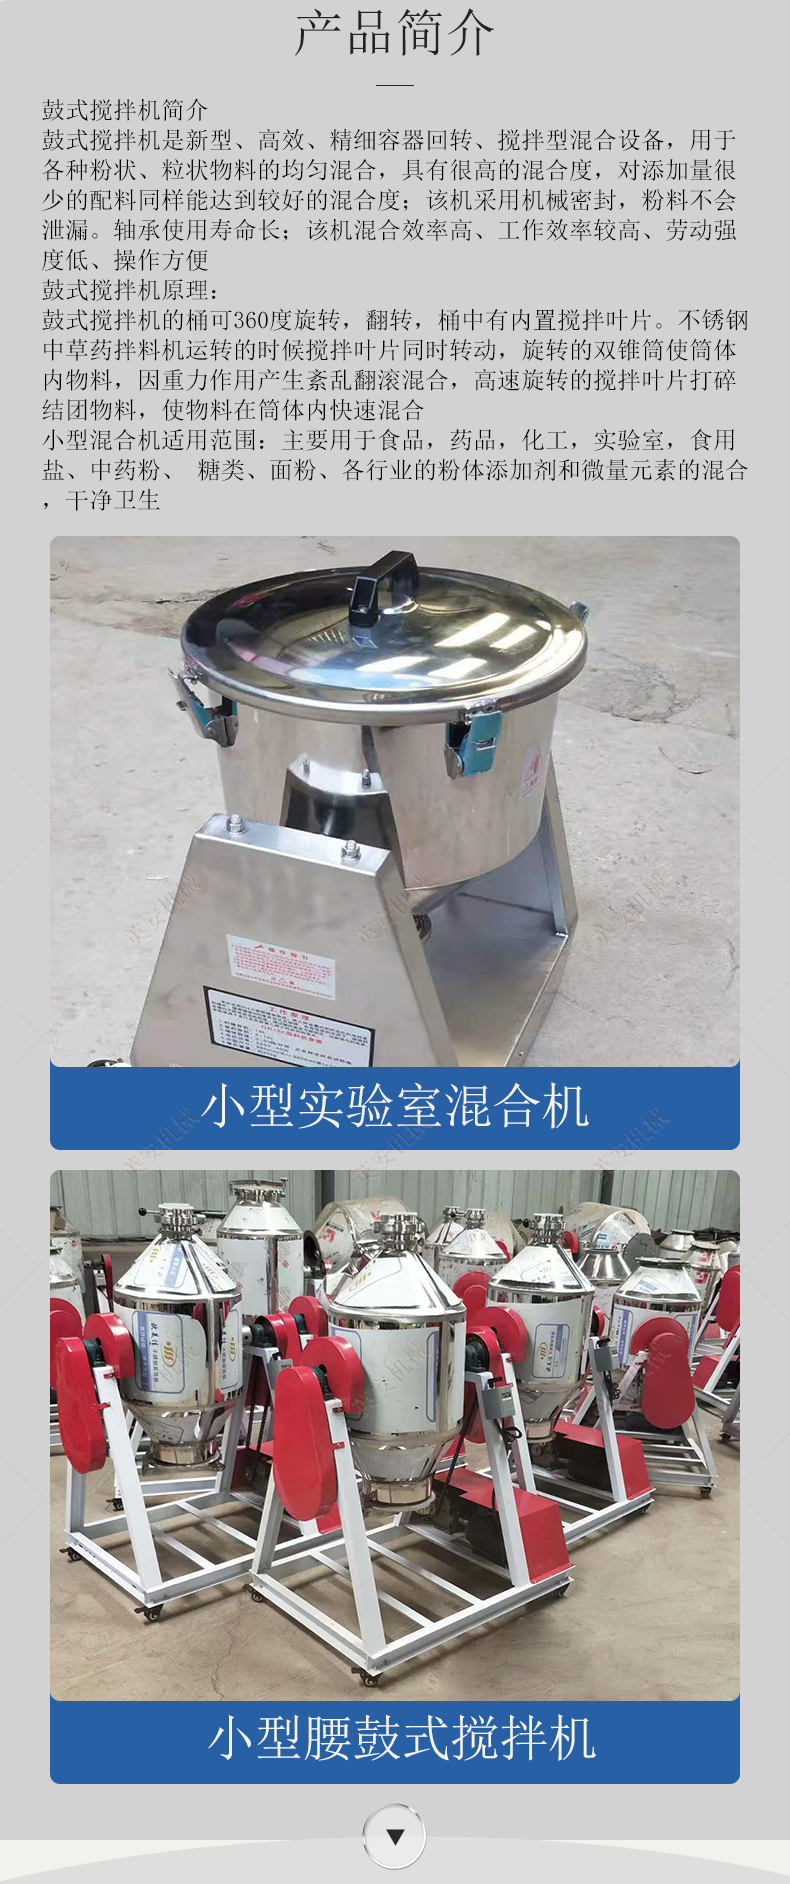 Laboratory Silent Mixer Stainless Steel Drum Powder Mixer Small Electric Powder Mixer